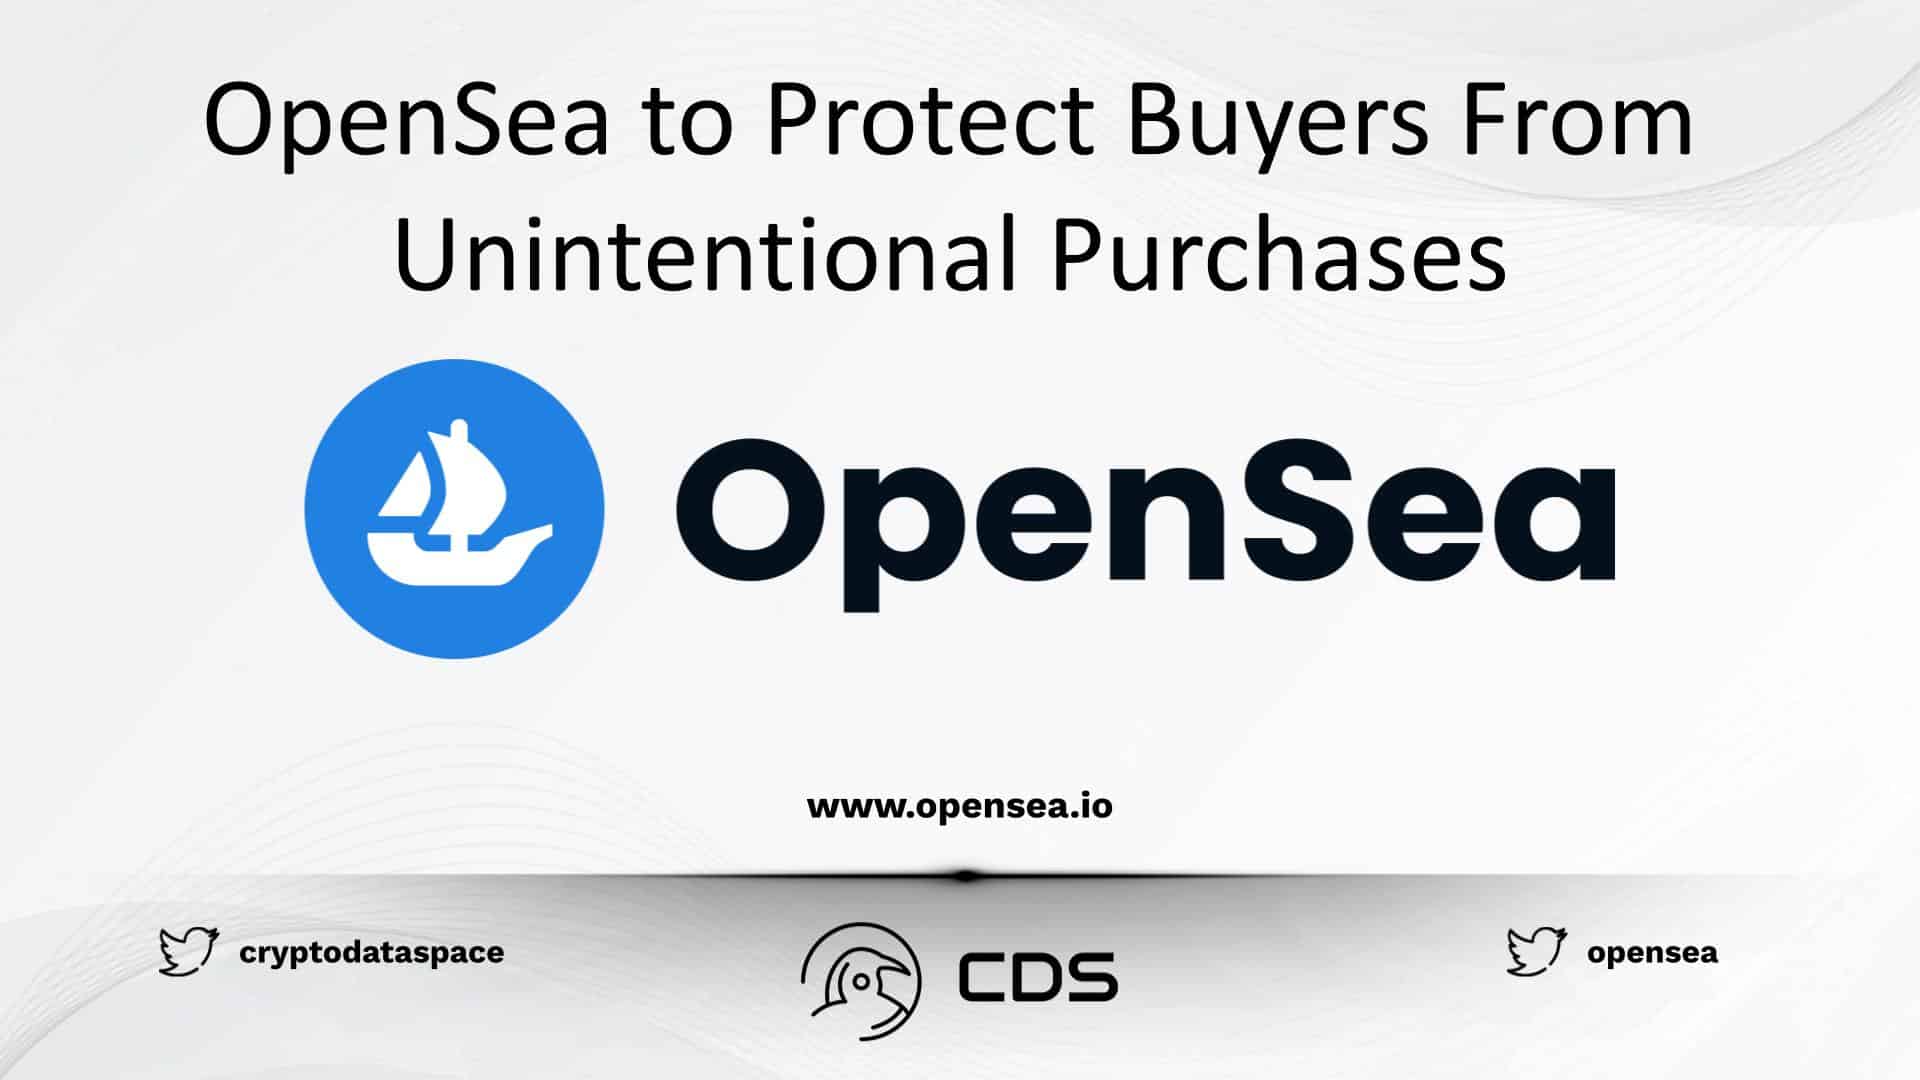 OpenSea to Protect Buyers From Unintentional Purchases